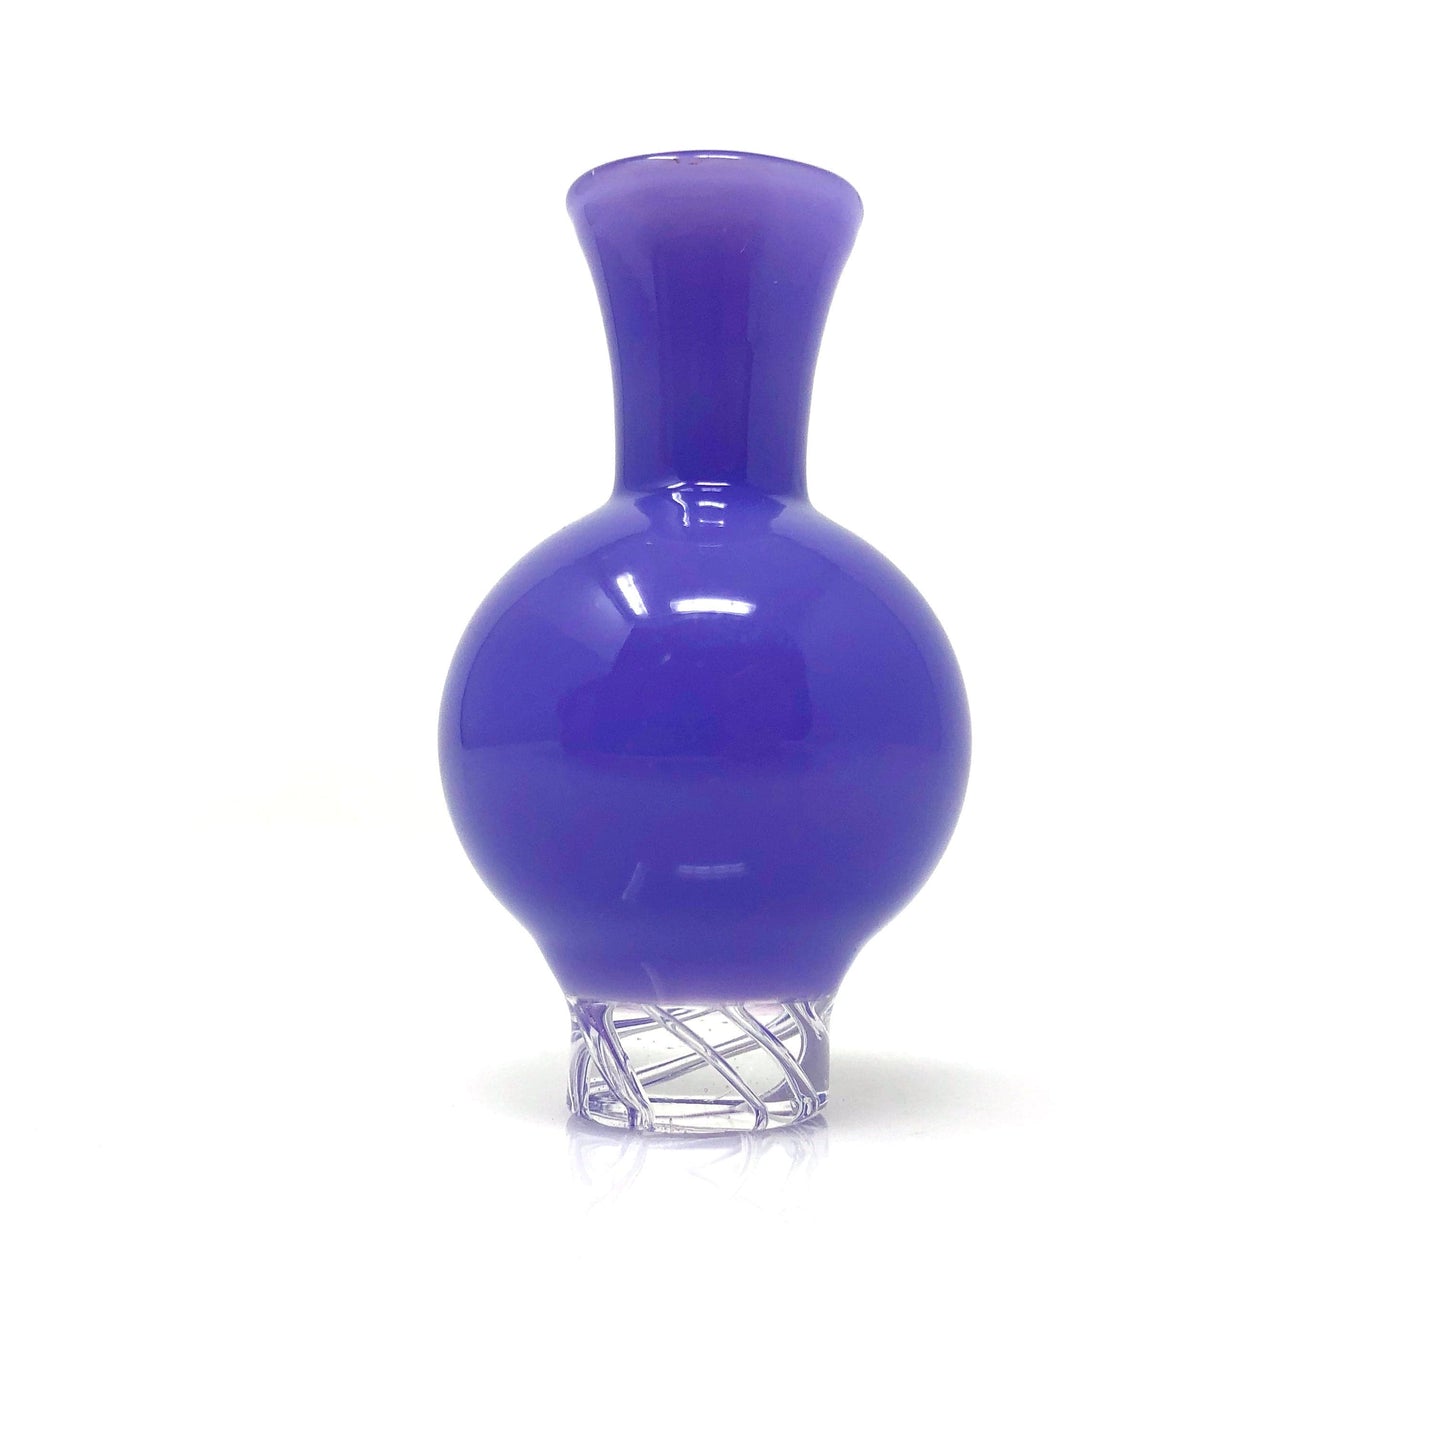 AFM Smoke Carb Cap Purple Full Color Turbo Spinner Carb Cap + 2 Pearls